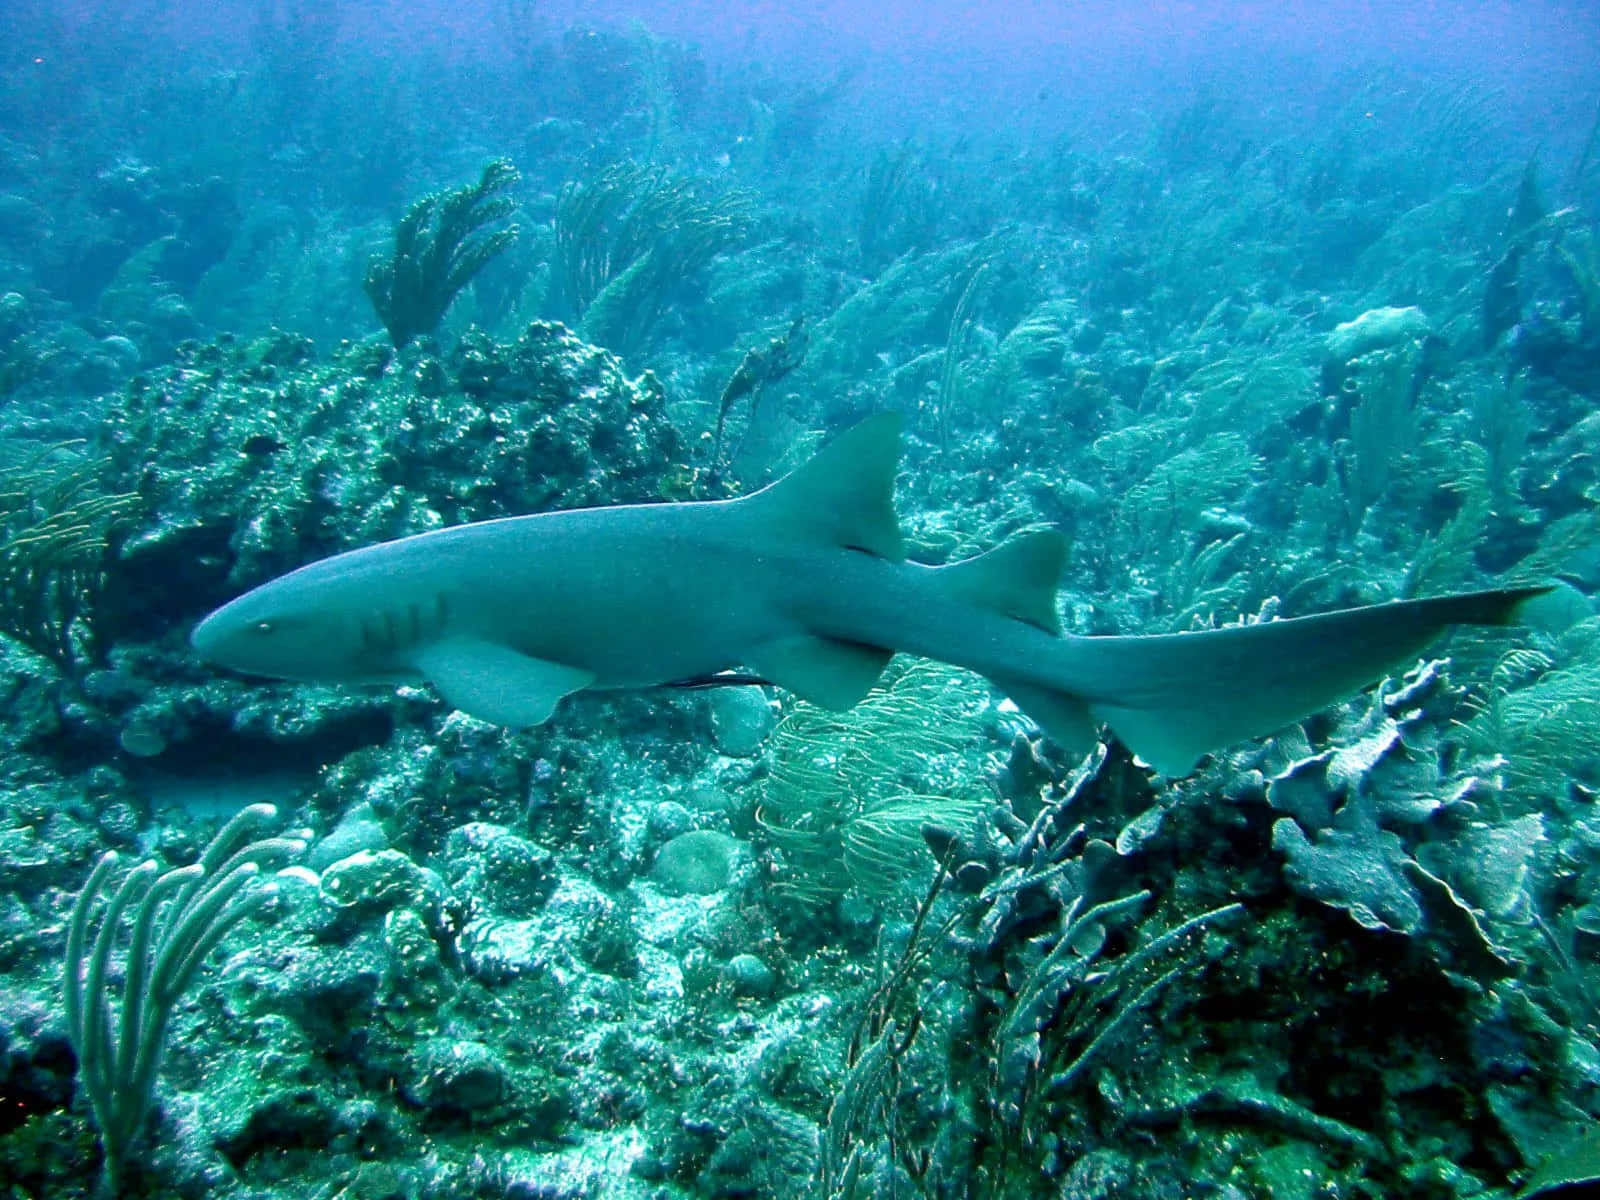 Caption: Gentle Giant Of The Sea - The Calm And Graceful Nurse Shark Wallpaper